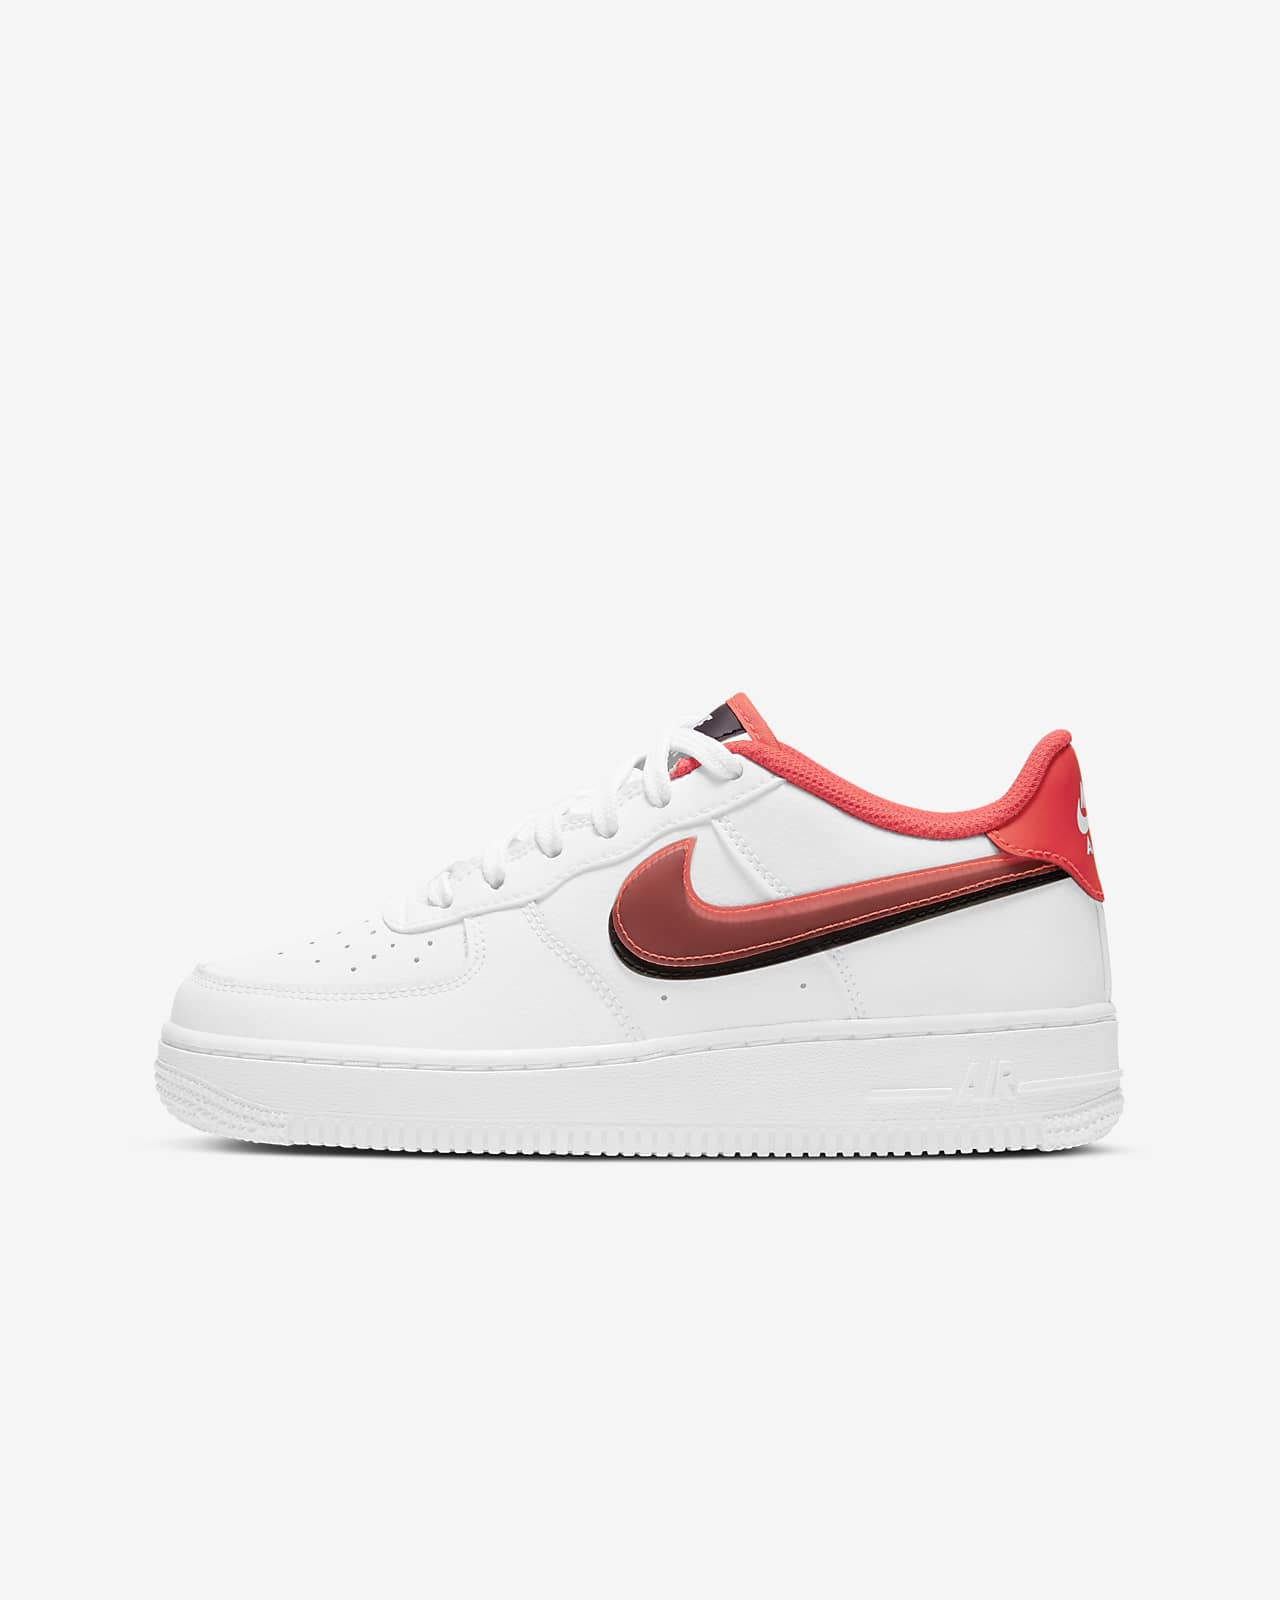 red bottom air force 1 lv8